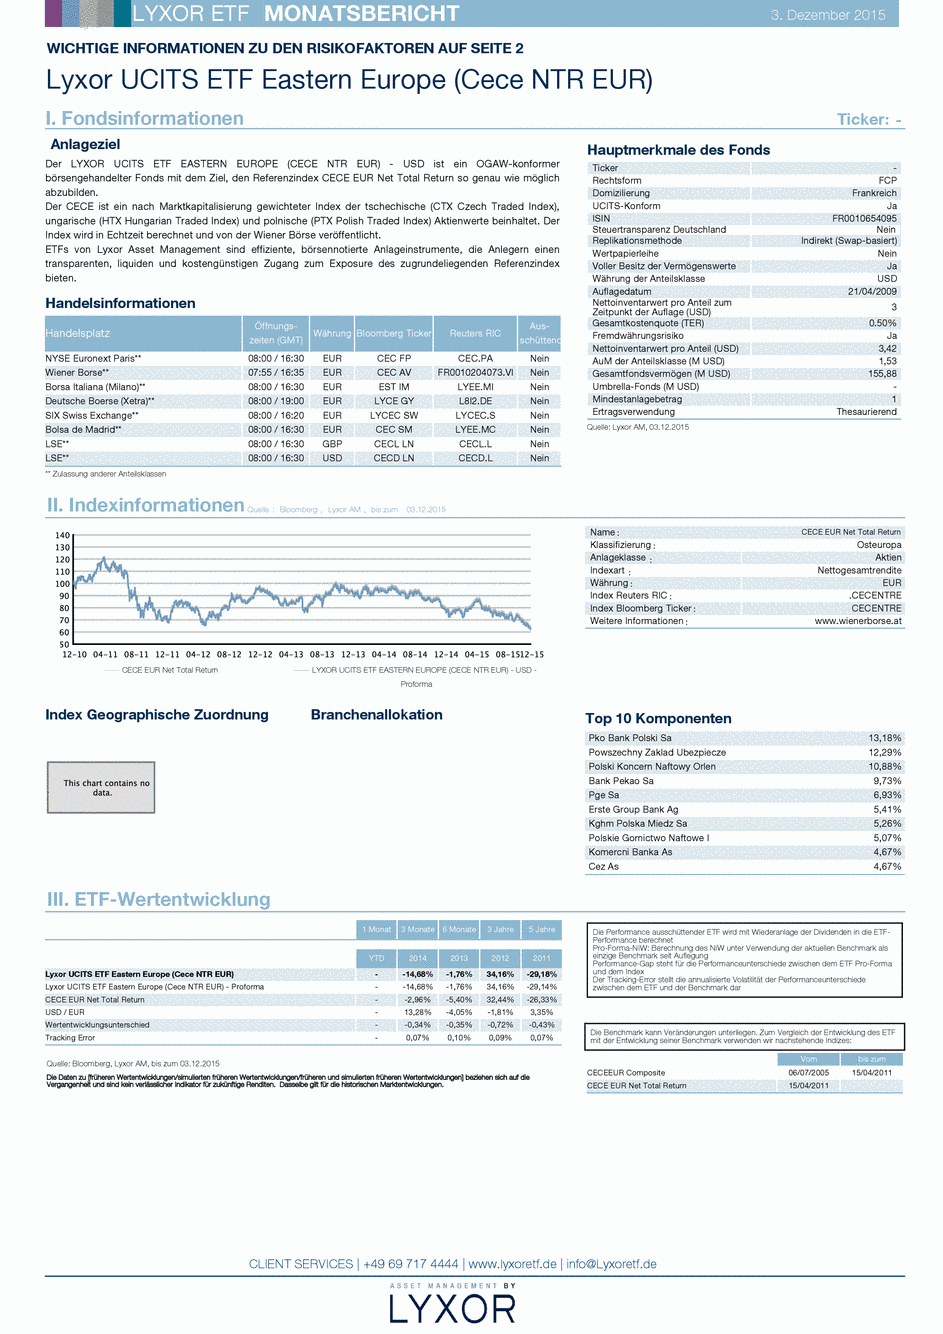 Reporting LYXOR UCITS ETF EASTERN EUROPE (CECE NTR EUR) USD - 03/12/2015 - Allemand